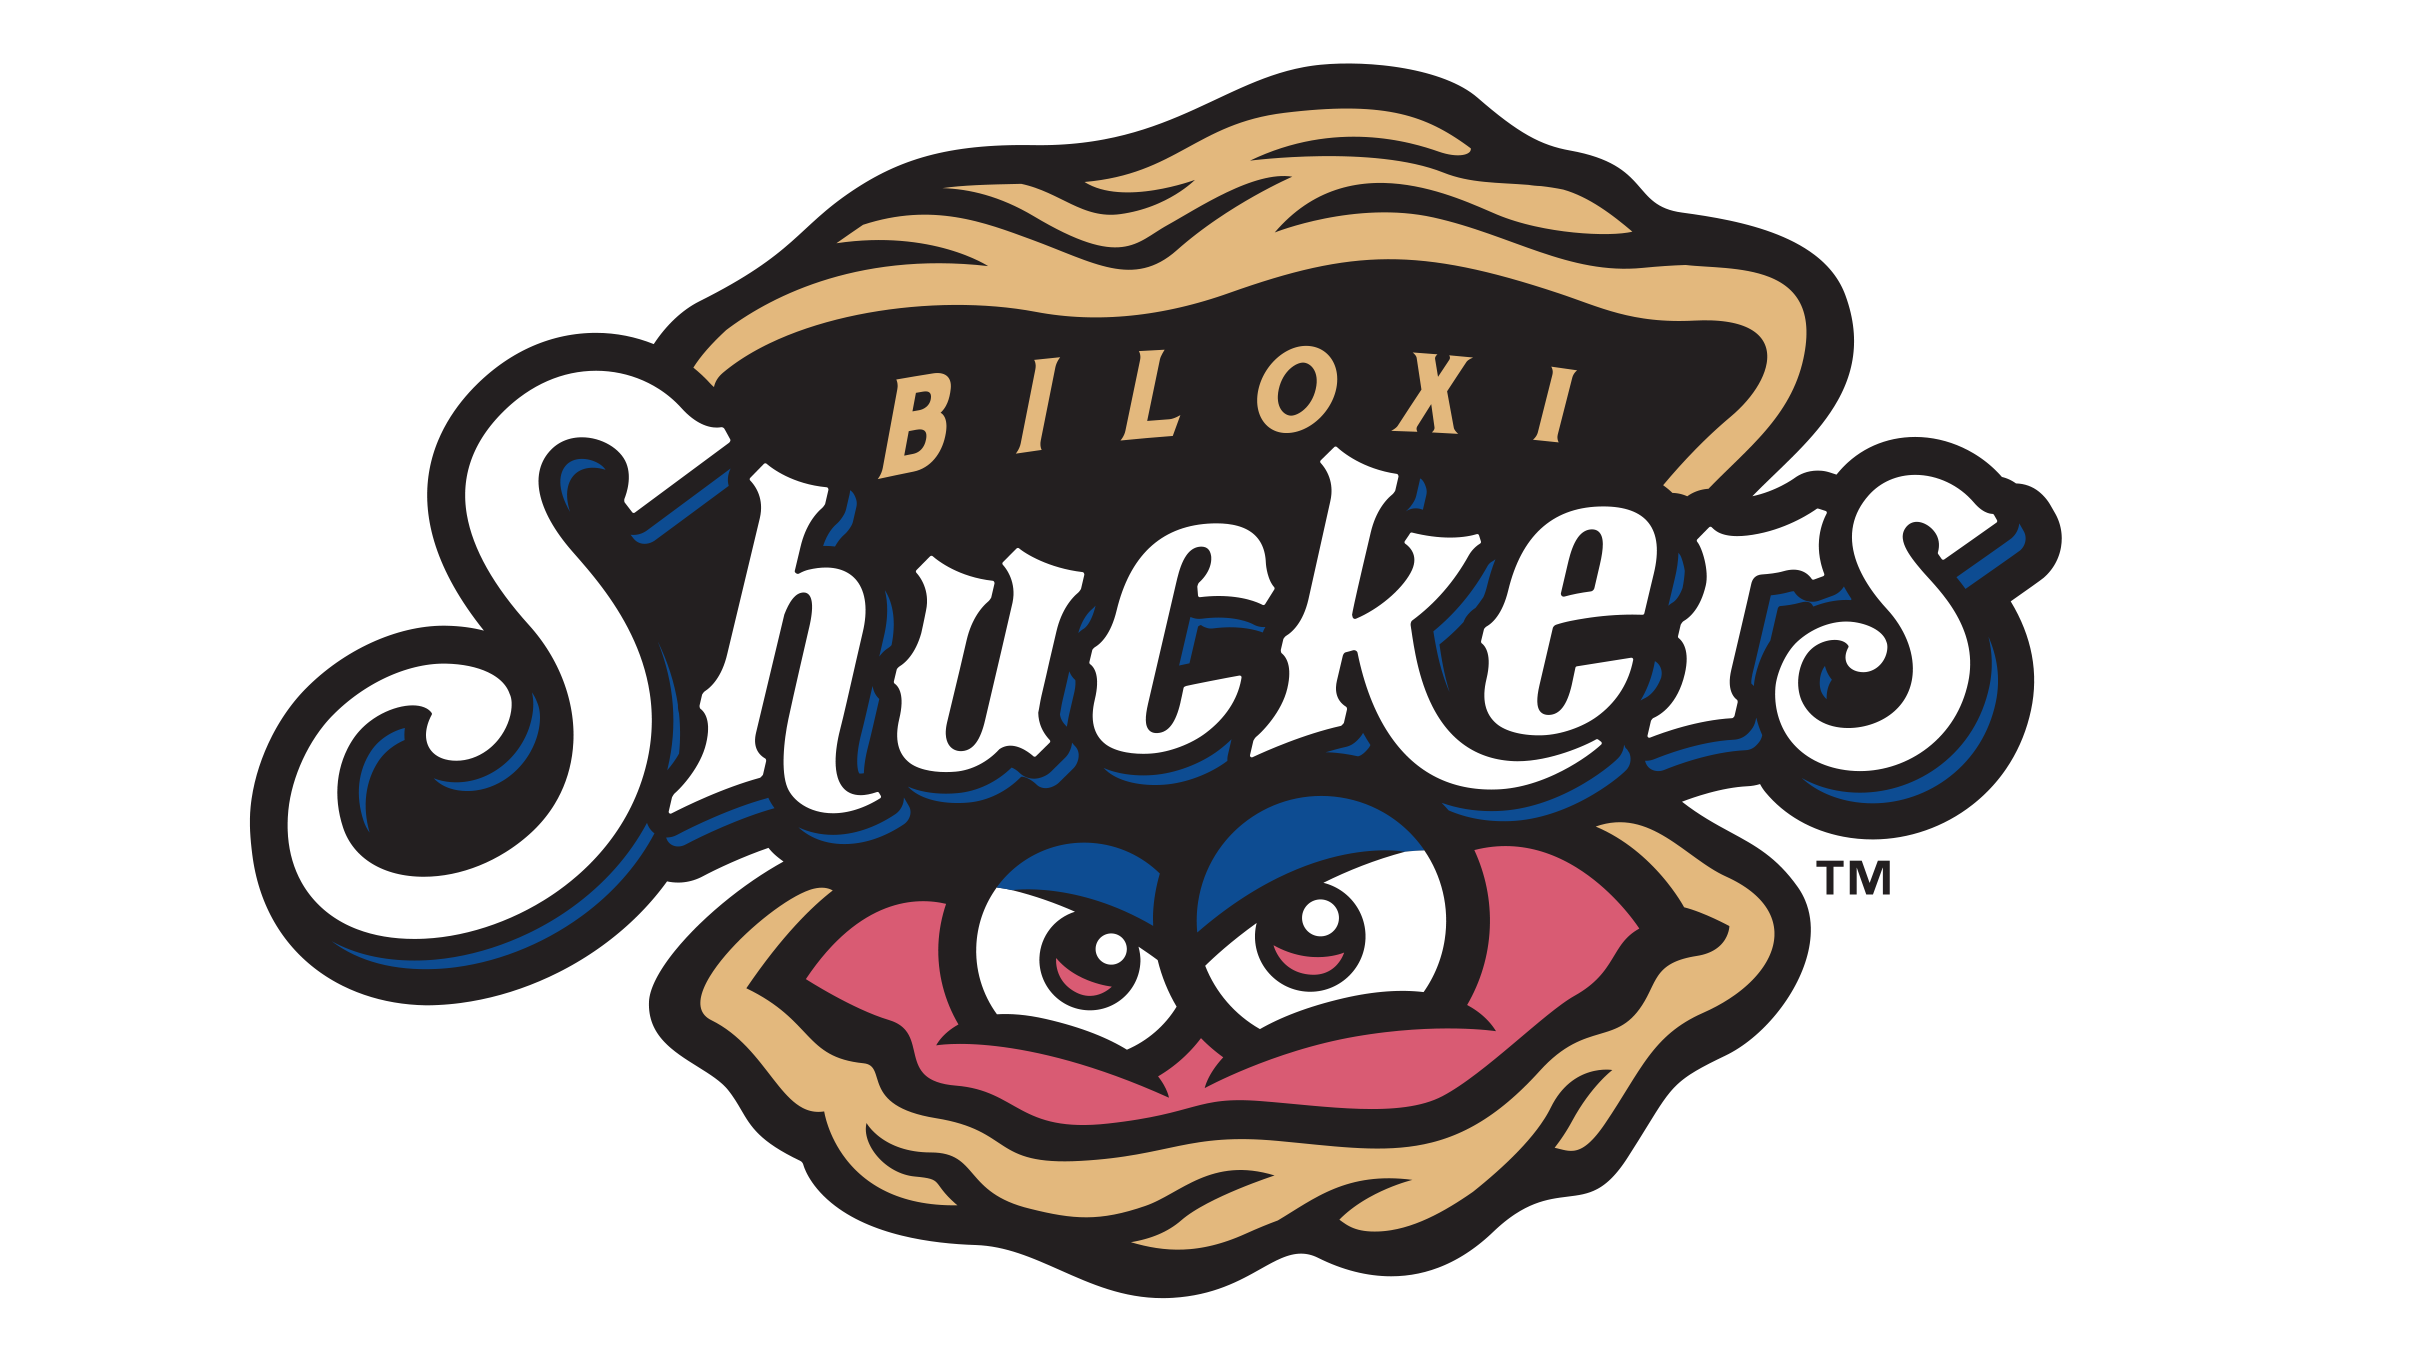 Biloxi Shuckers vs. Montgomery Biscuits at MGM Park